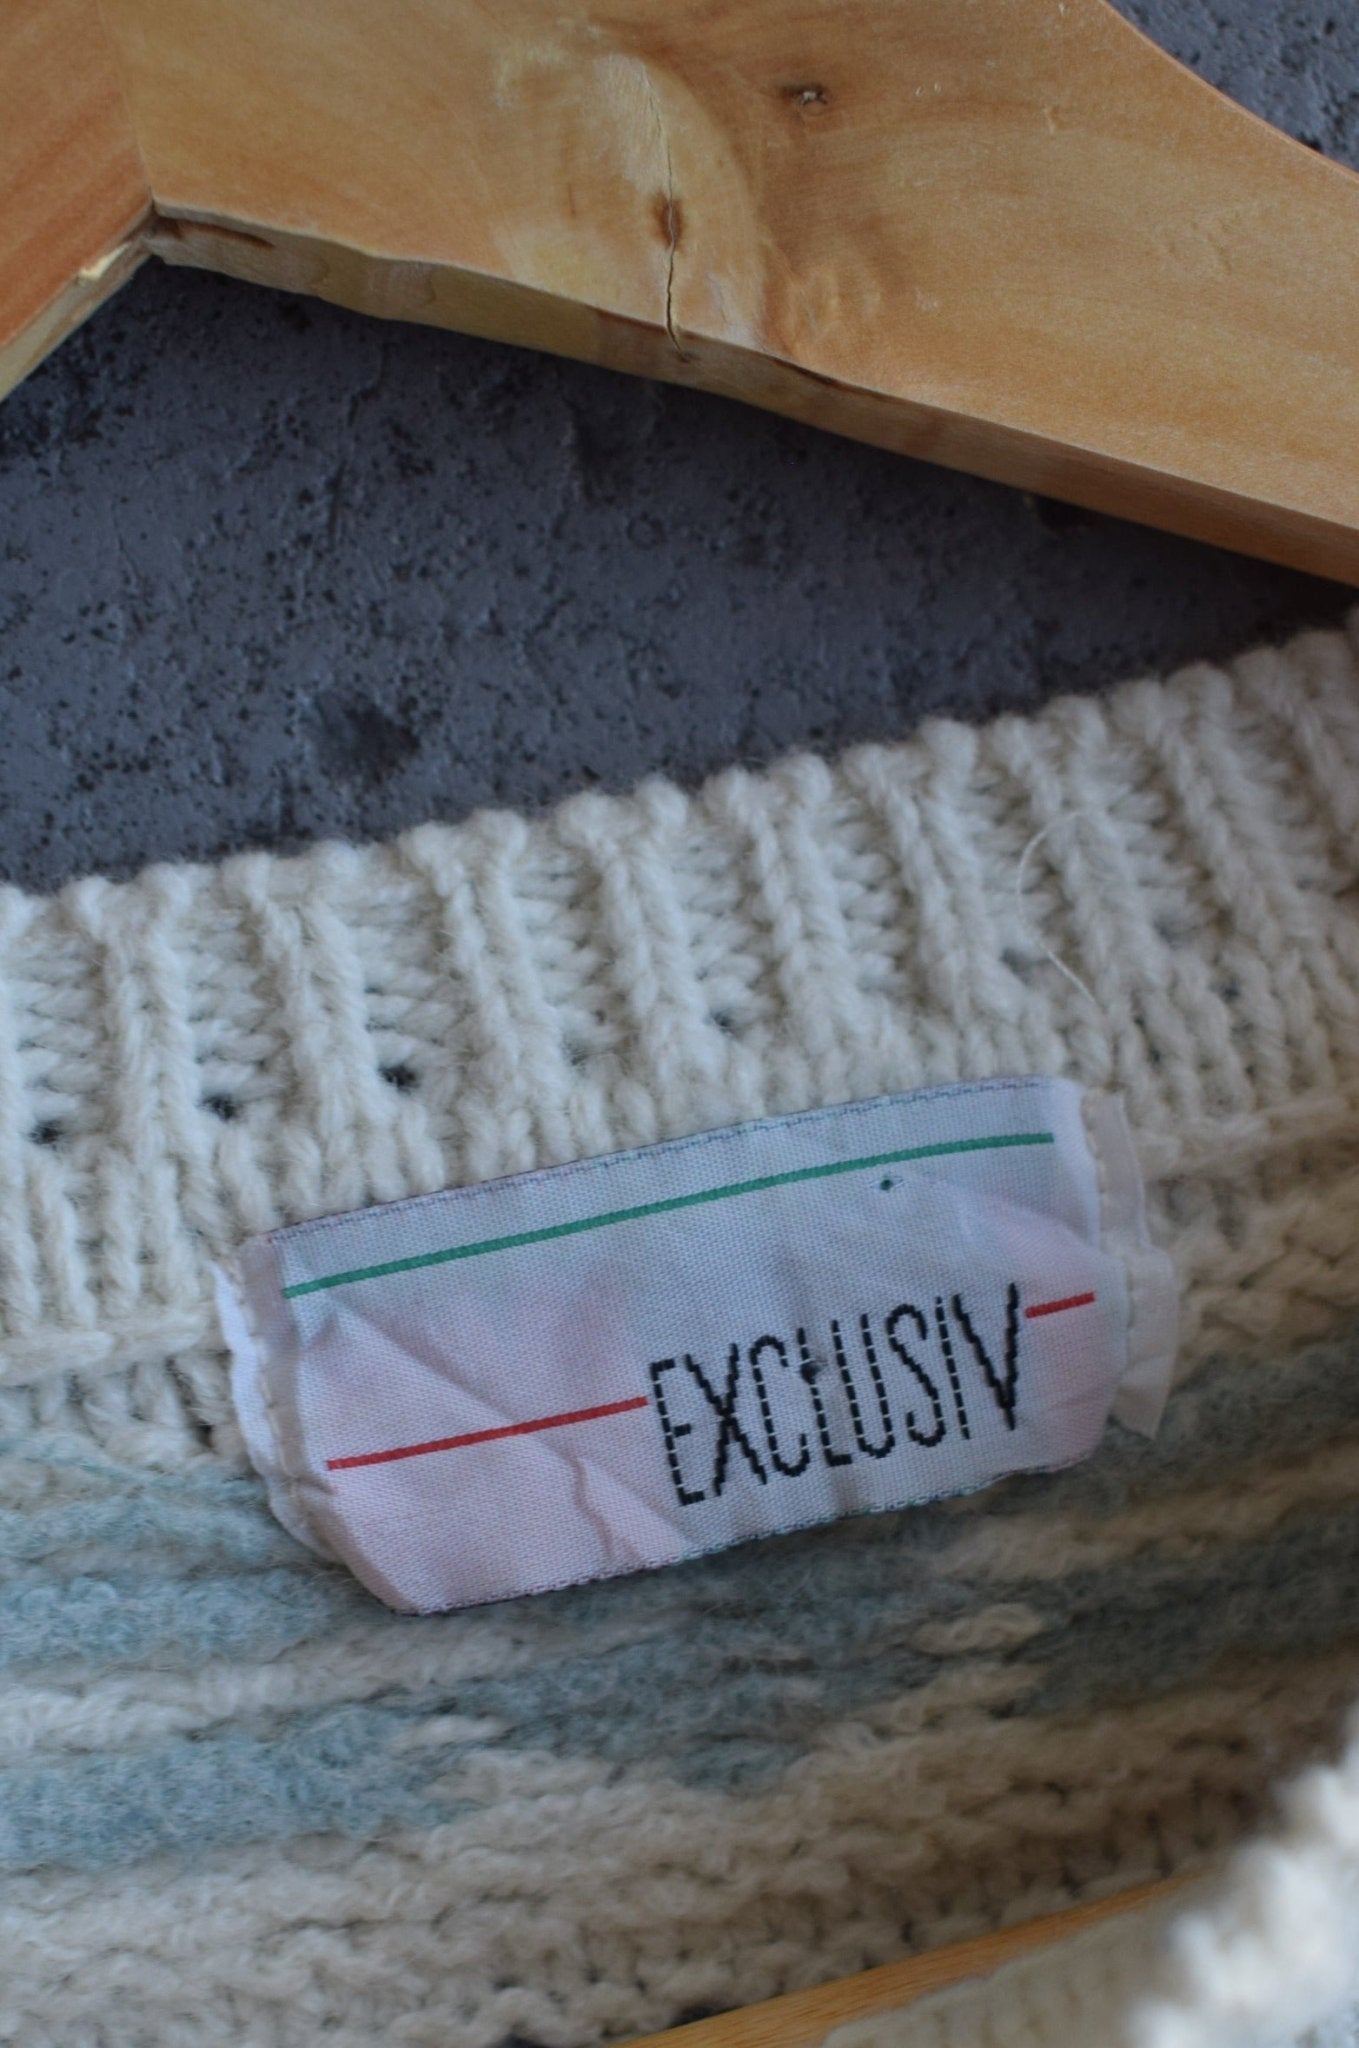 Vintage 90s 'Exclusiv' Knitted Sweater (S) - Retrospective Store